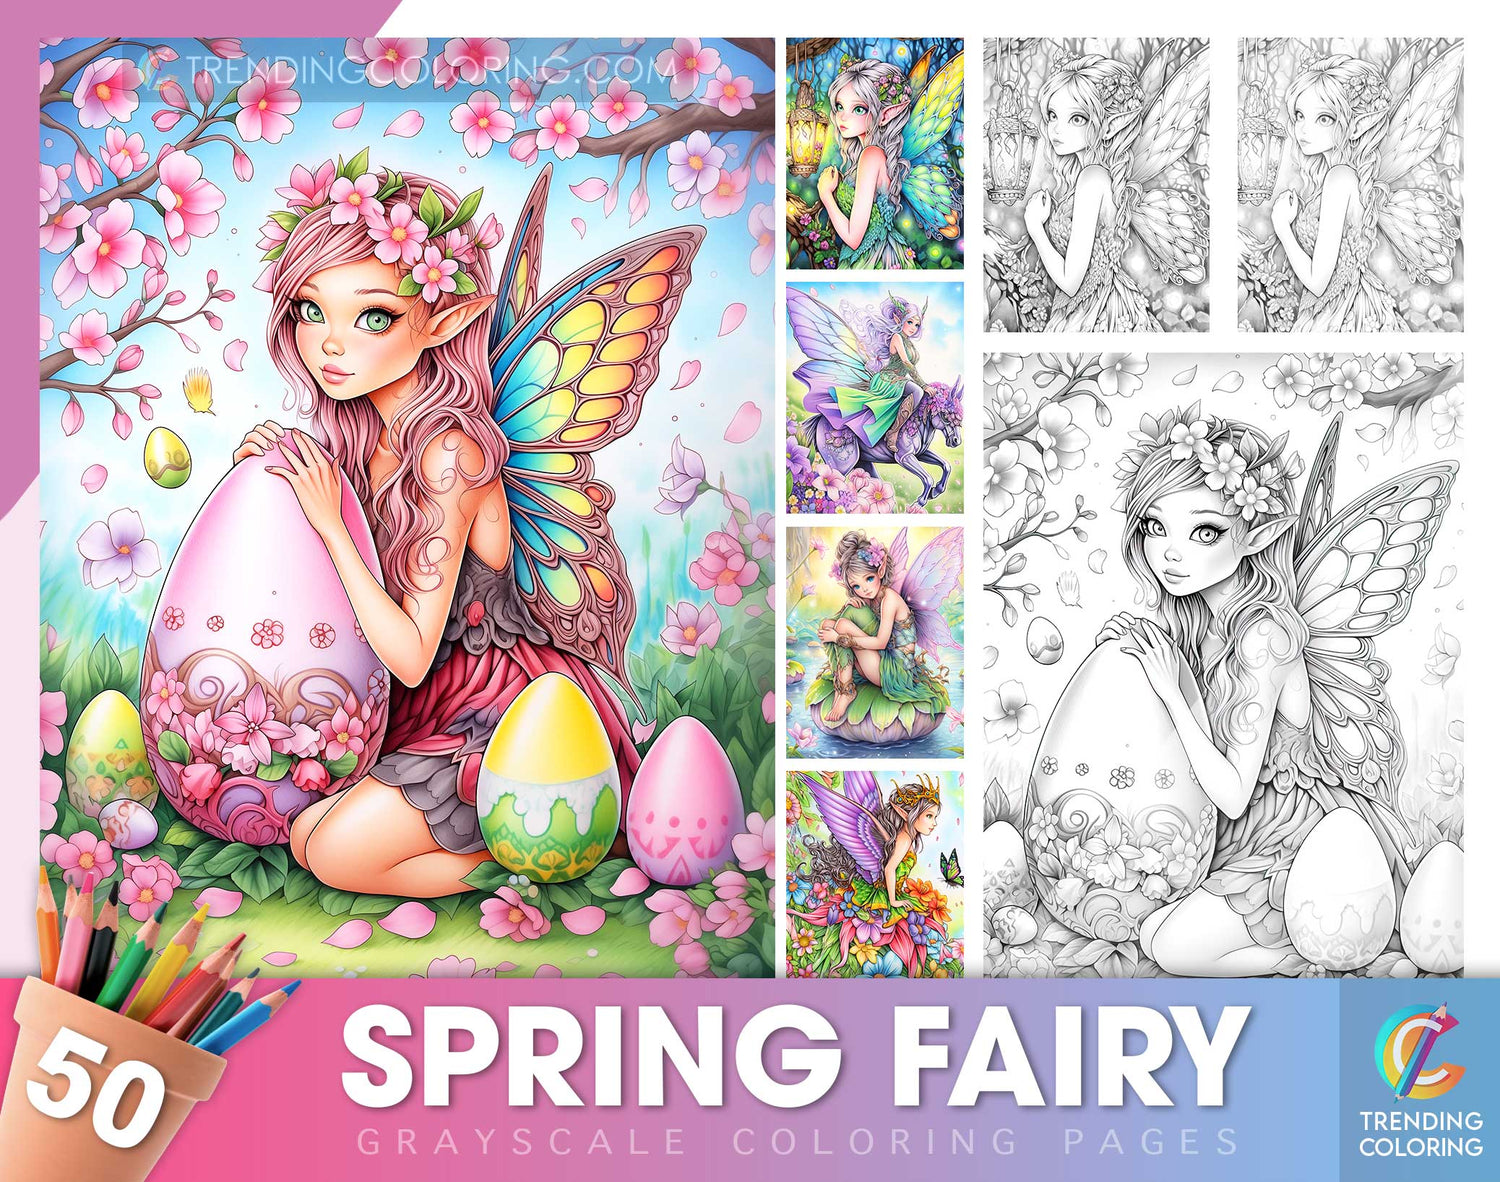 50 Spring Fairy Grayscale Coloring Pages - Instant Download - Printable Dark/Light